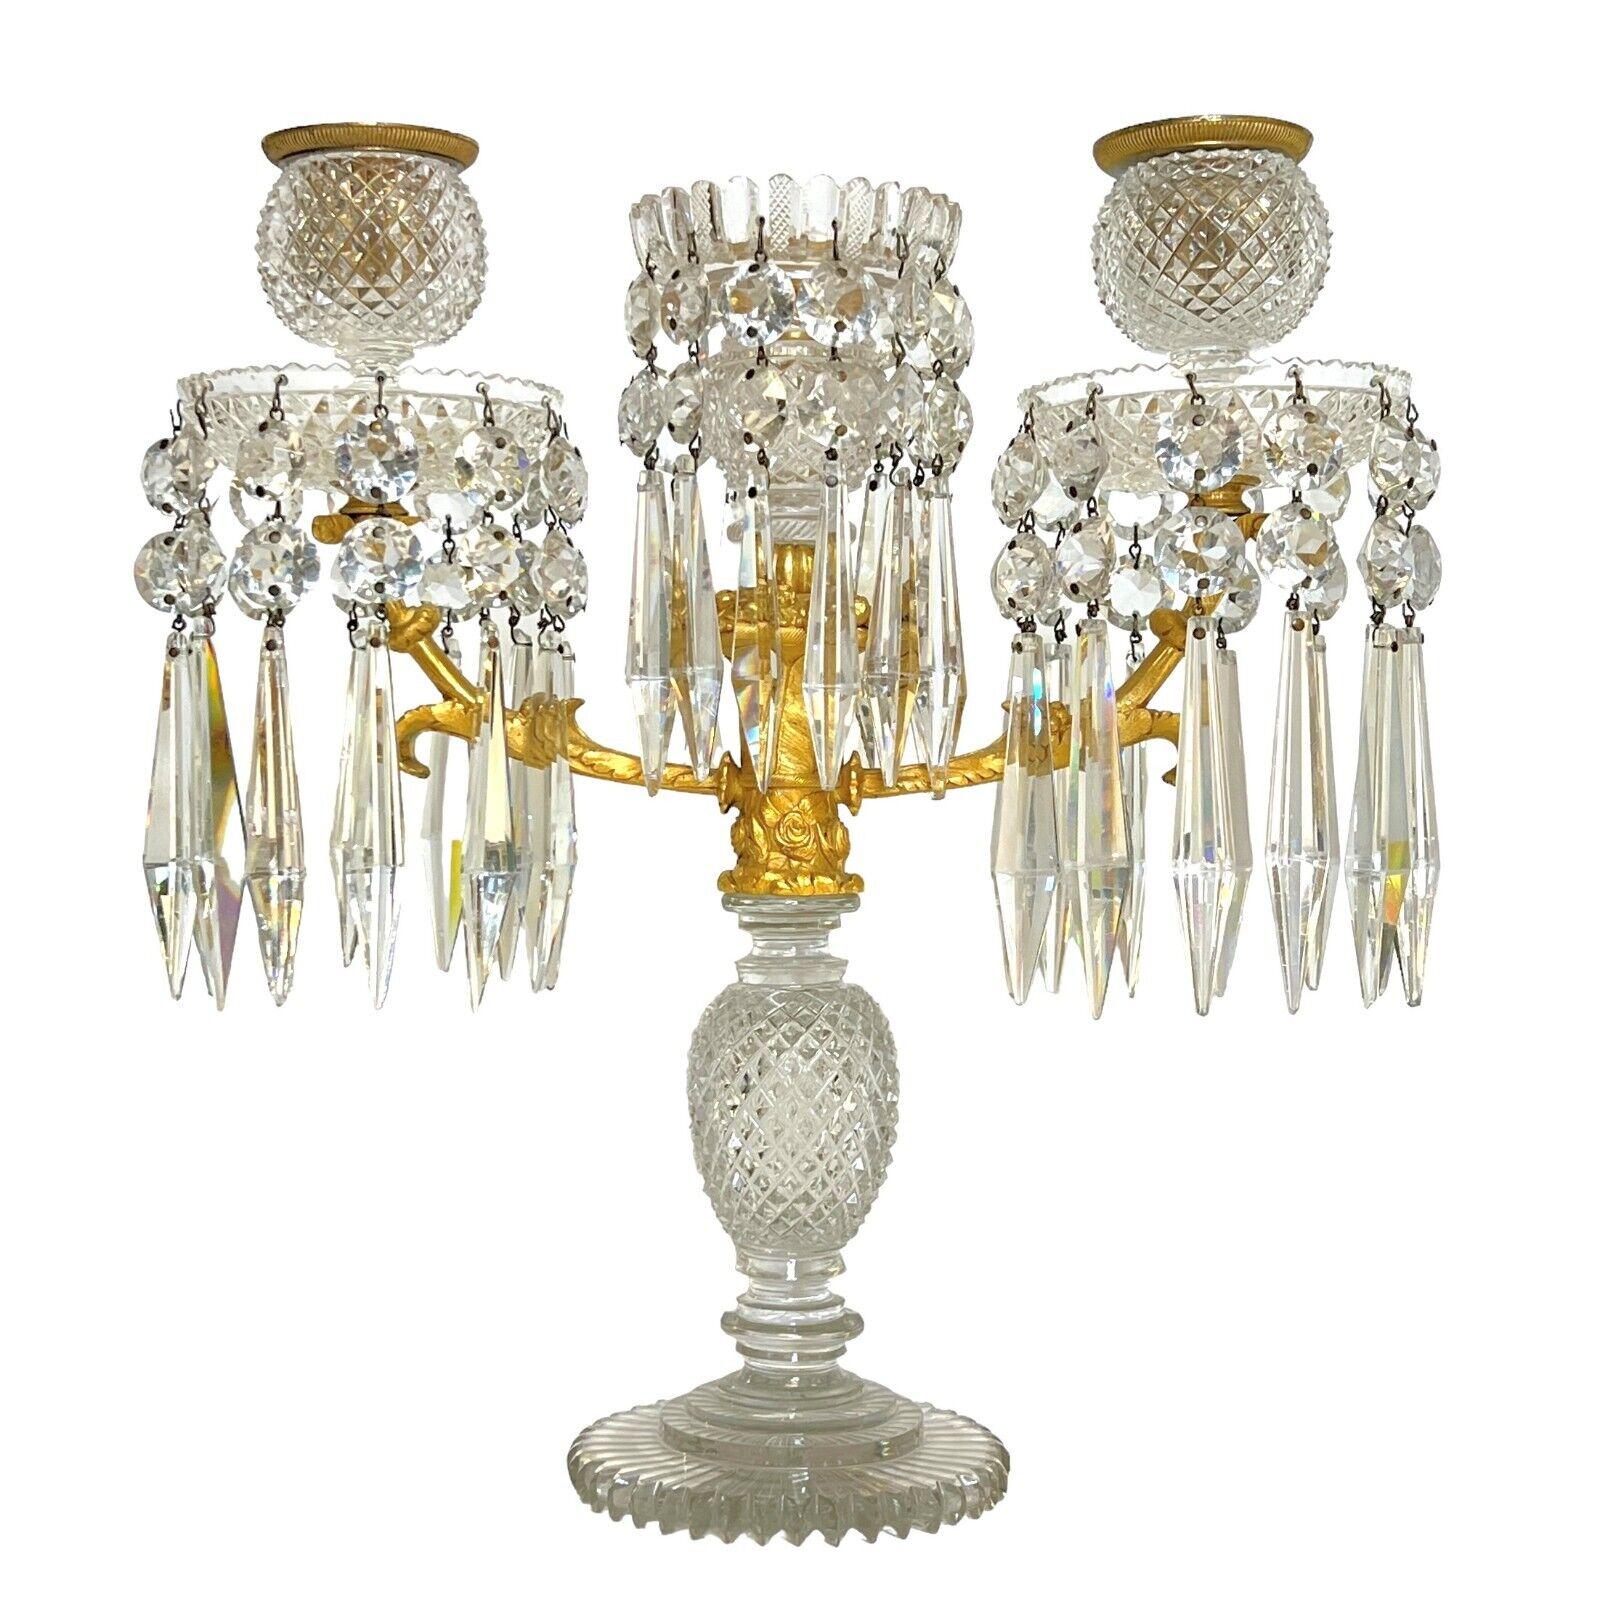 A Pair Of English Regency Ormolu and Cut Glass Candelabra, attributed to Blades For Sale 1